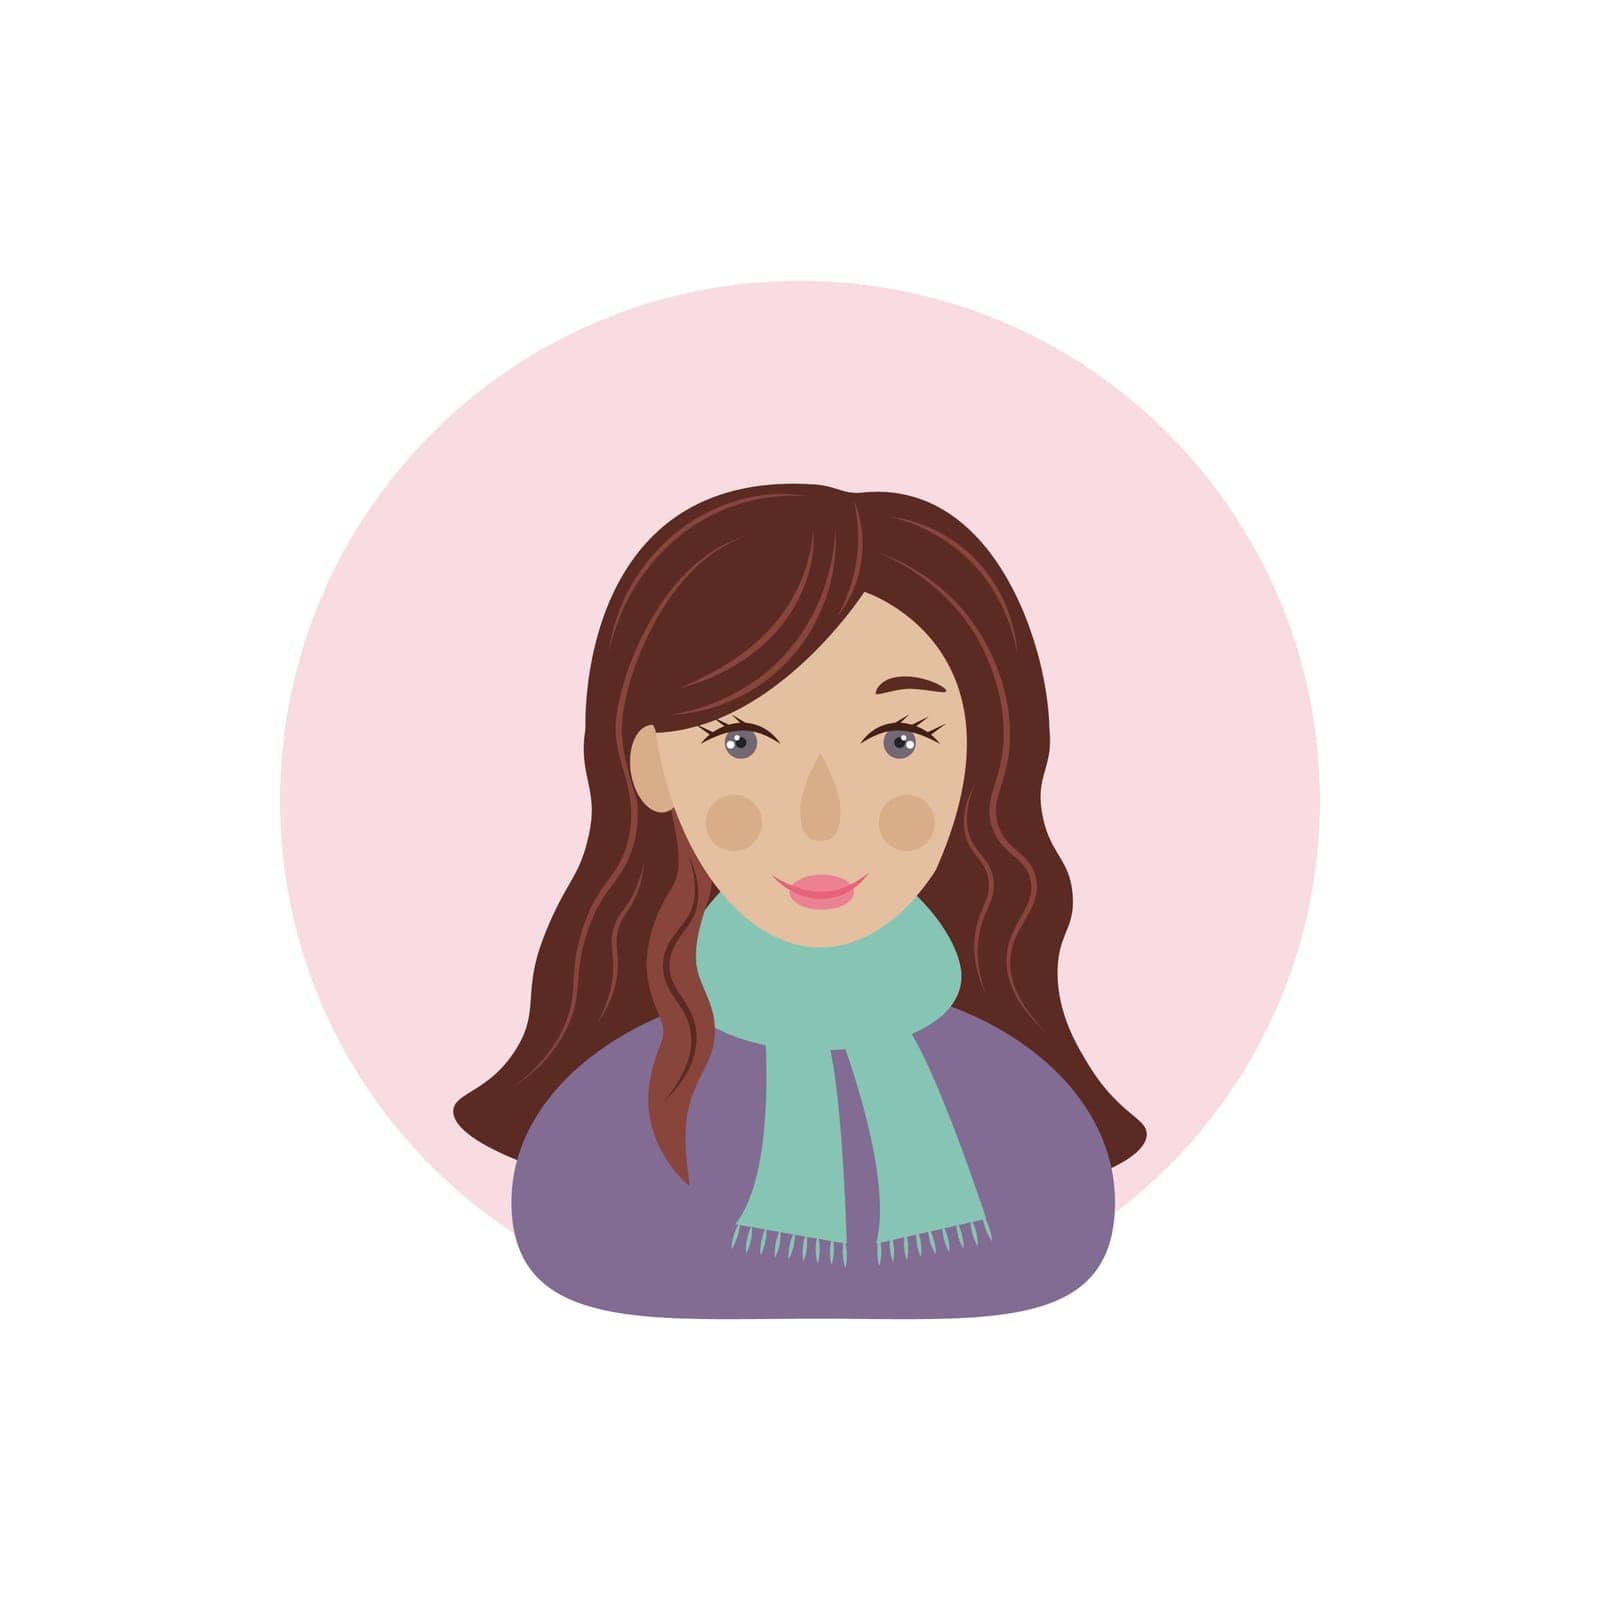 A girl with brown hair. Avatar with the image of a cute girl in cartoon style. A woman in a blue sweater and a green scarf. Vector illustration.